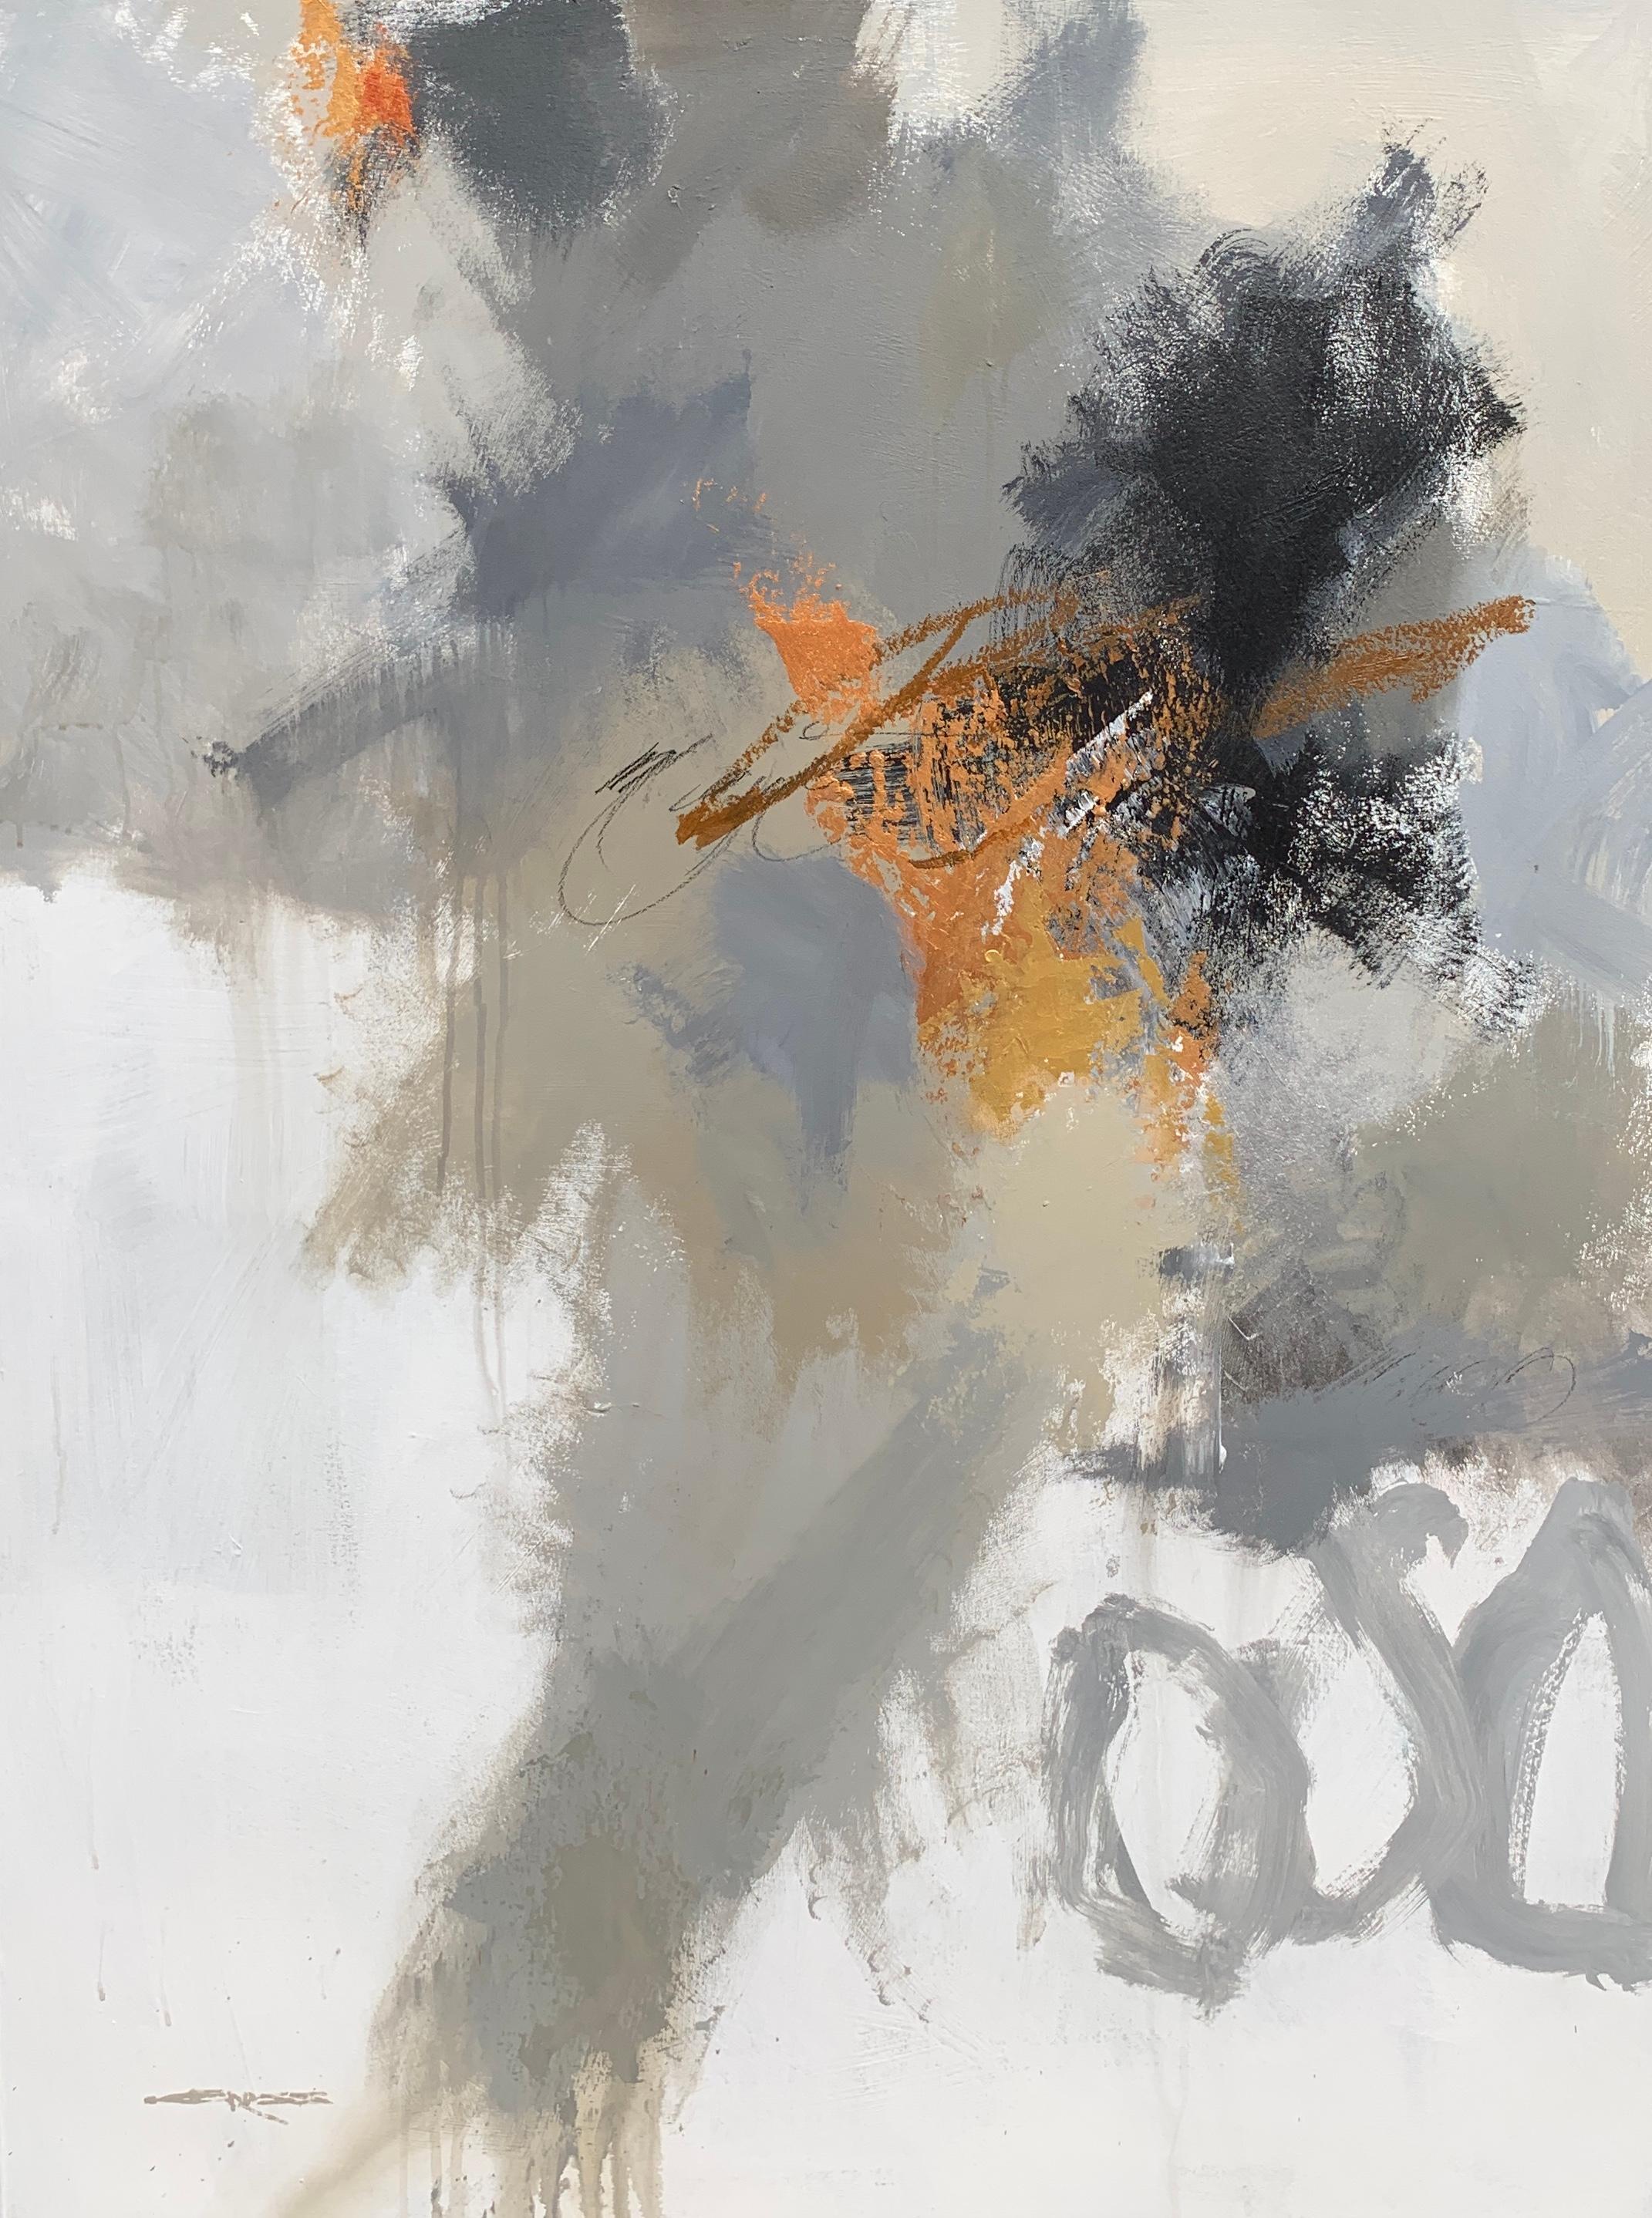 'Chelsea Cool I' is an oil and mixed media on canvas abstract painting of vertical format created by American artist Charles Ross in 2019. Featuring a palette mostly made of grey, black, brown and orange tonalities, this abstract painting exudes an